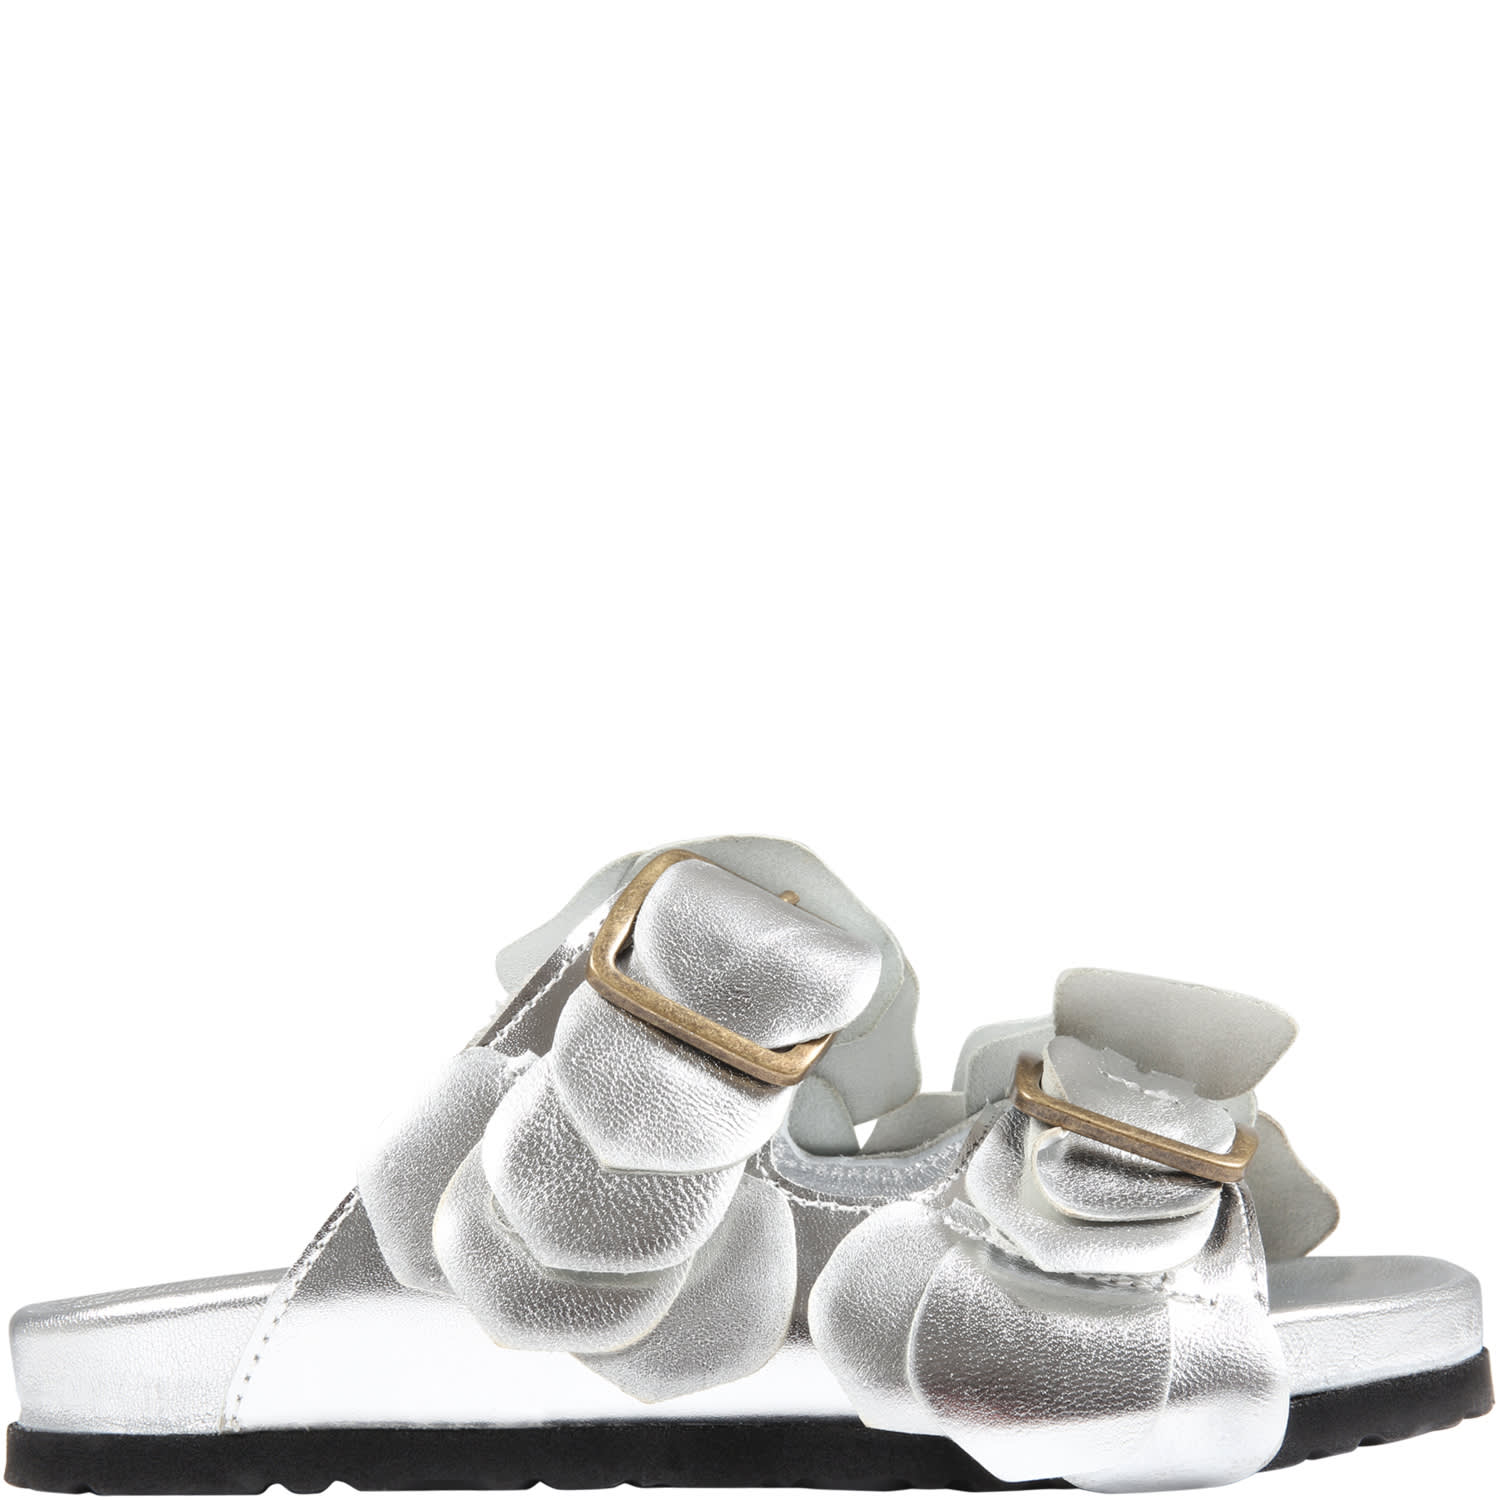 Gallucci silver sandals for girl with flowers